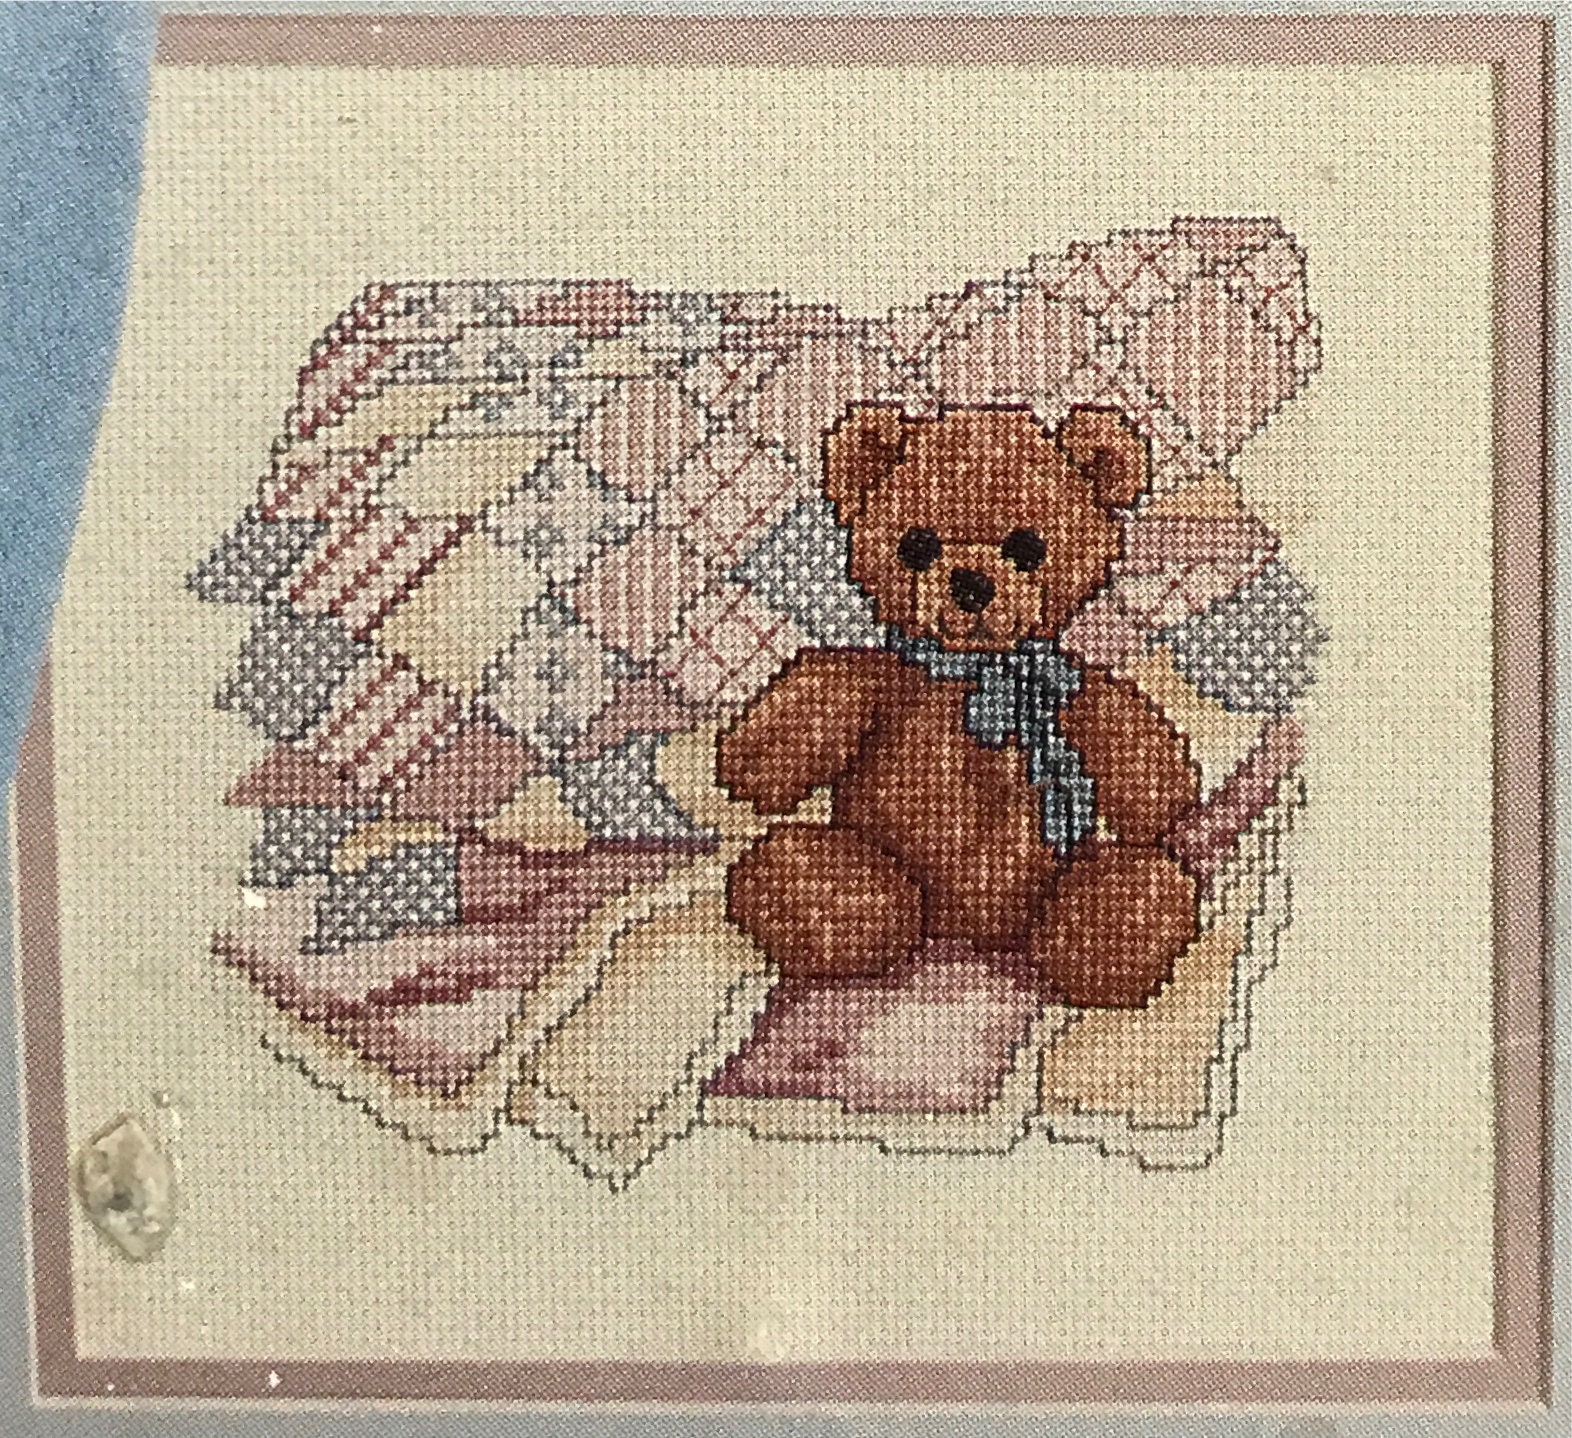 Bear on Quilt Counted Cross Stitch Pattern Friends Awaiting - Etsy